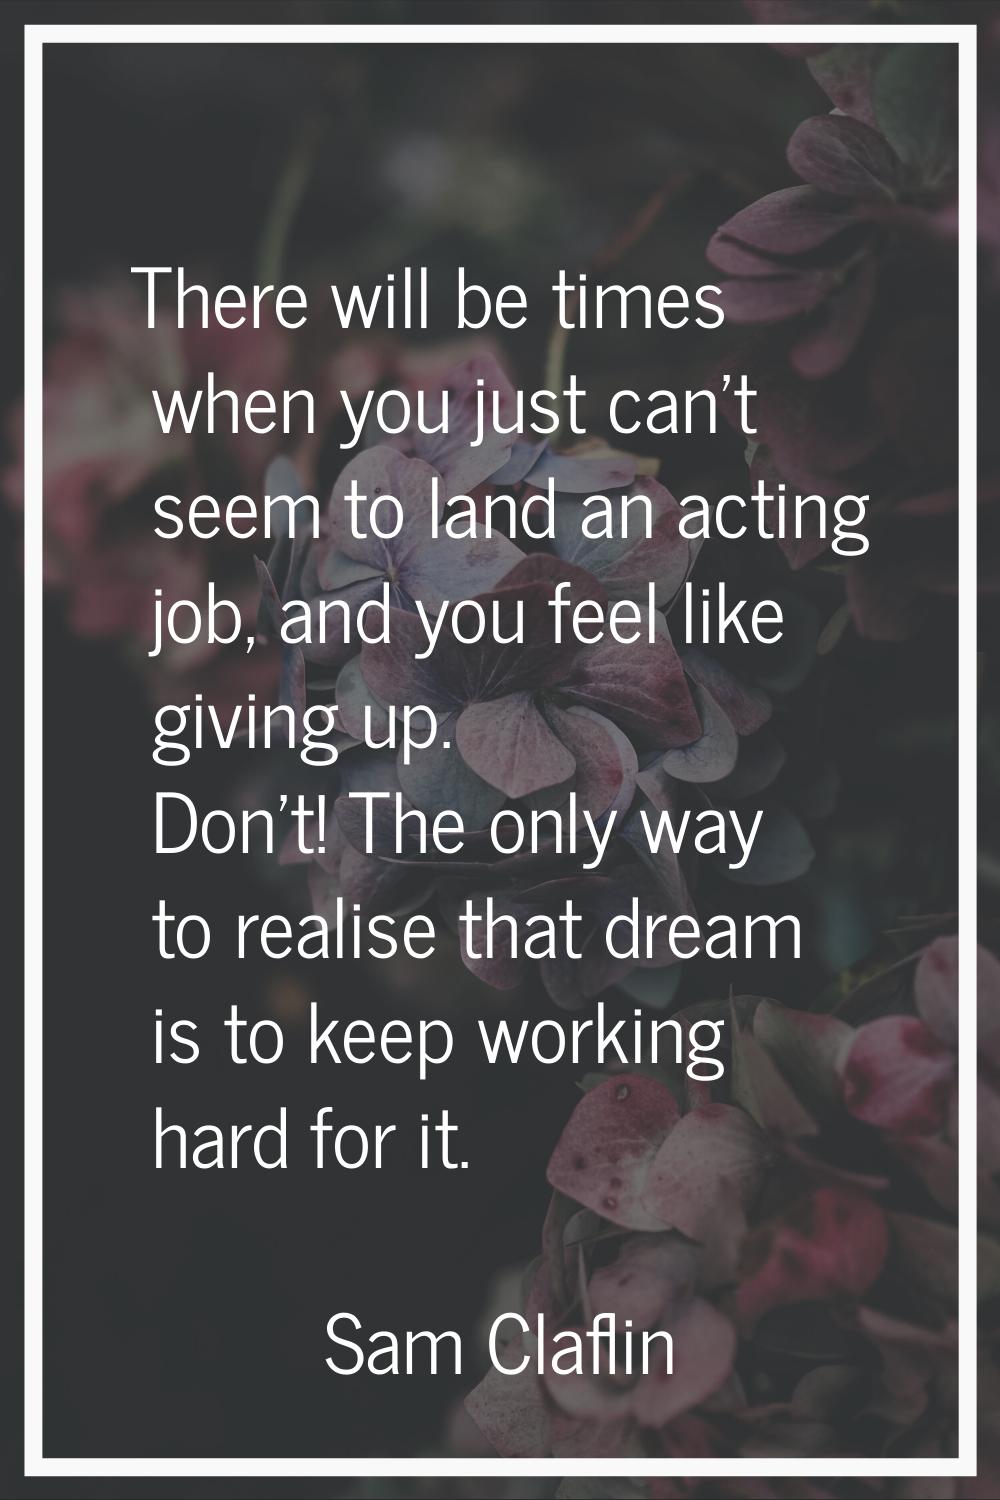 There will be times when you just can't seem to land an acting job, and you feel like giving up. Do